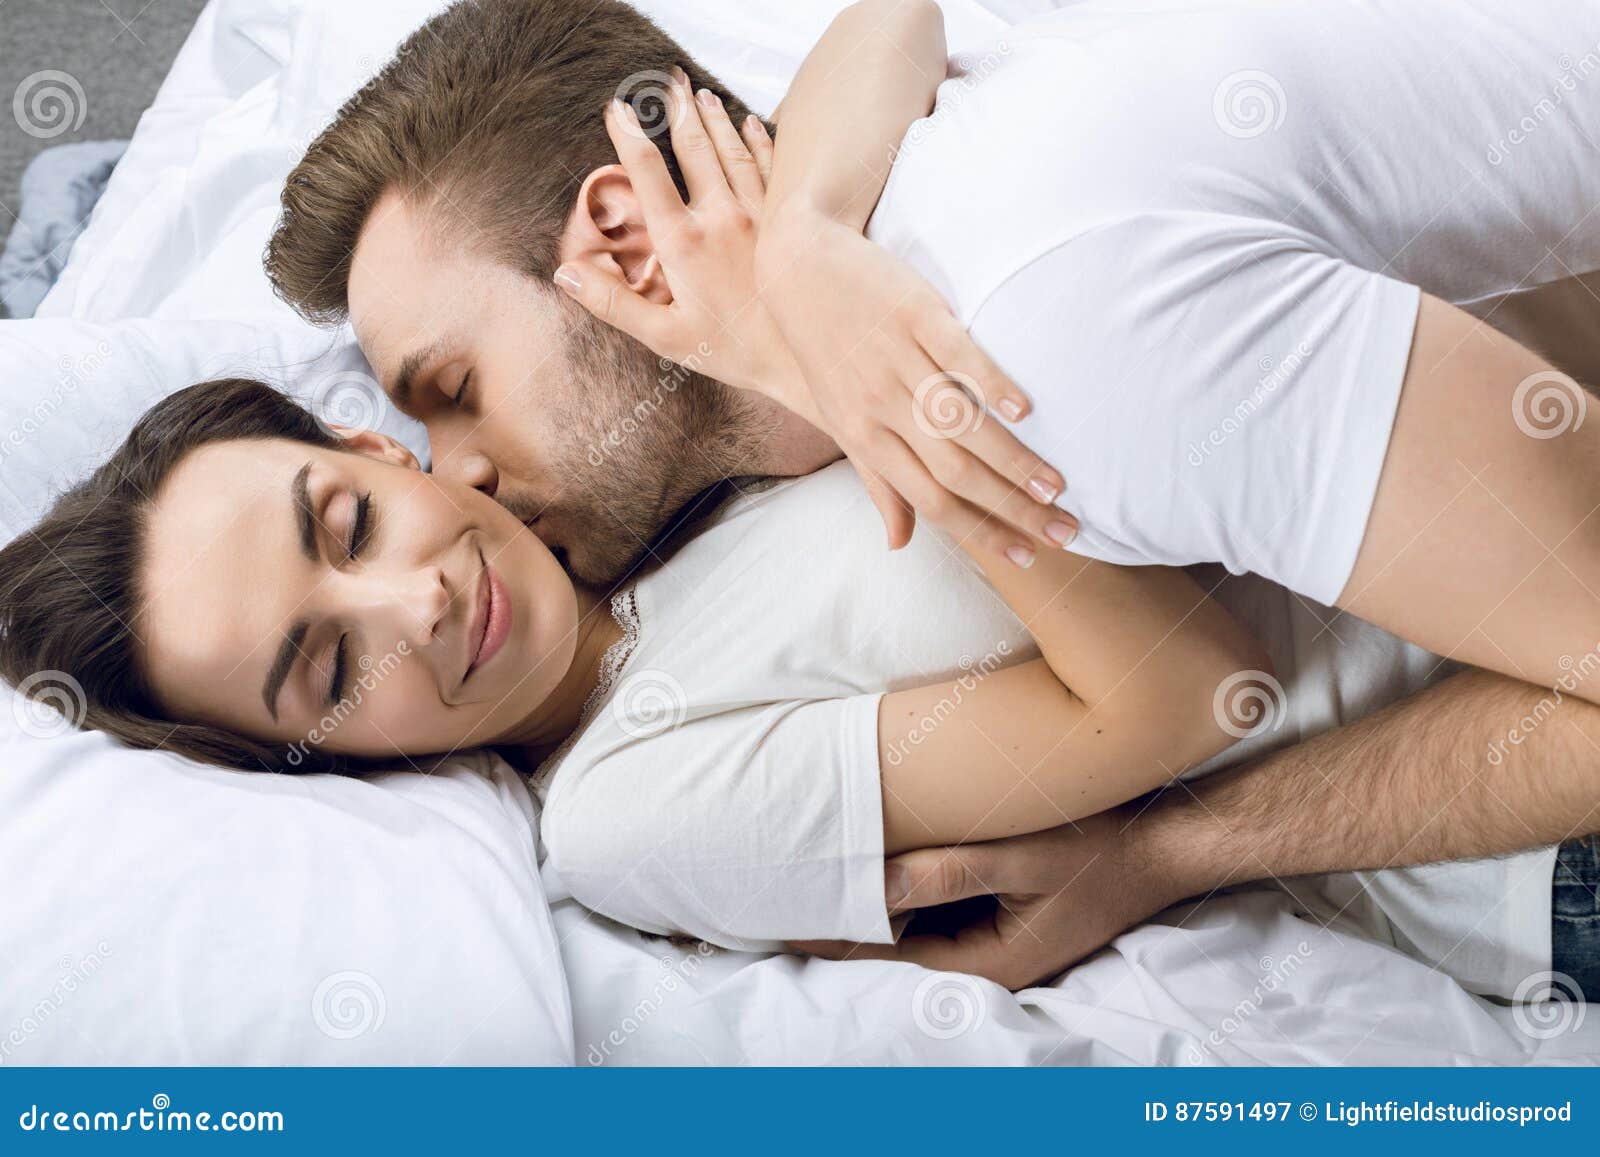 Man Kissing Smiling Woman In Bed Stock Image   Image of european 